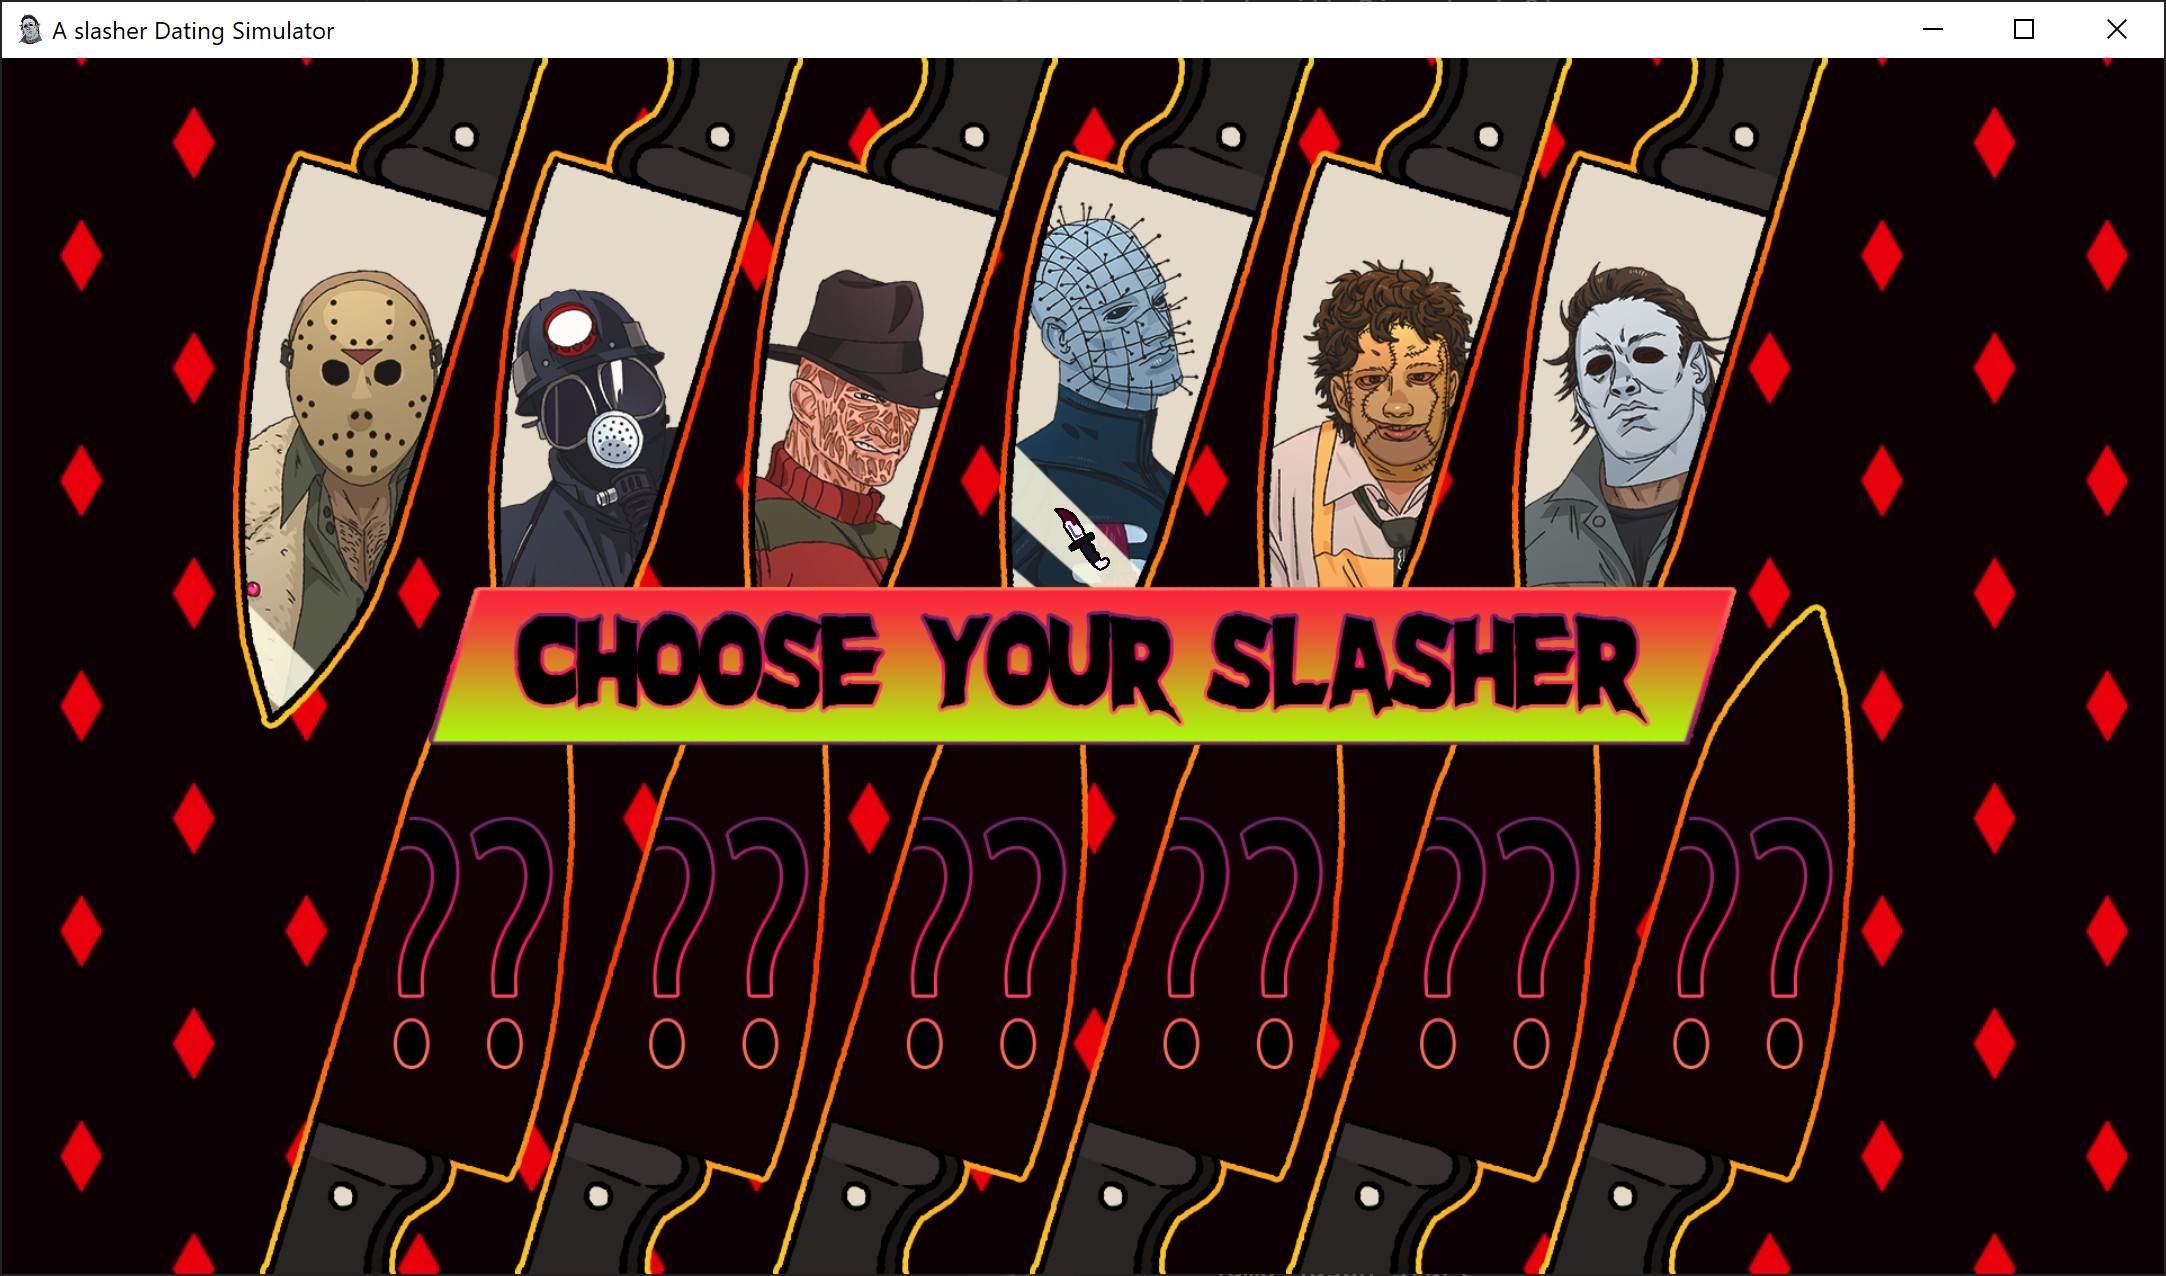 new-selection-screens-and-a-look-at-the-old-one-a-slasher-dating-simulator-by-a-slasher